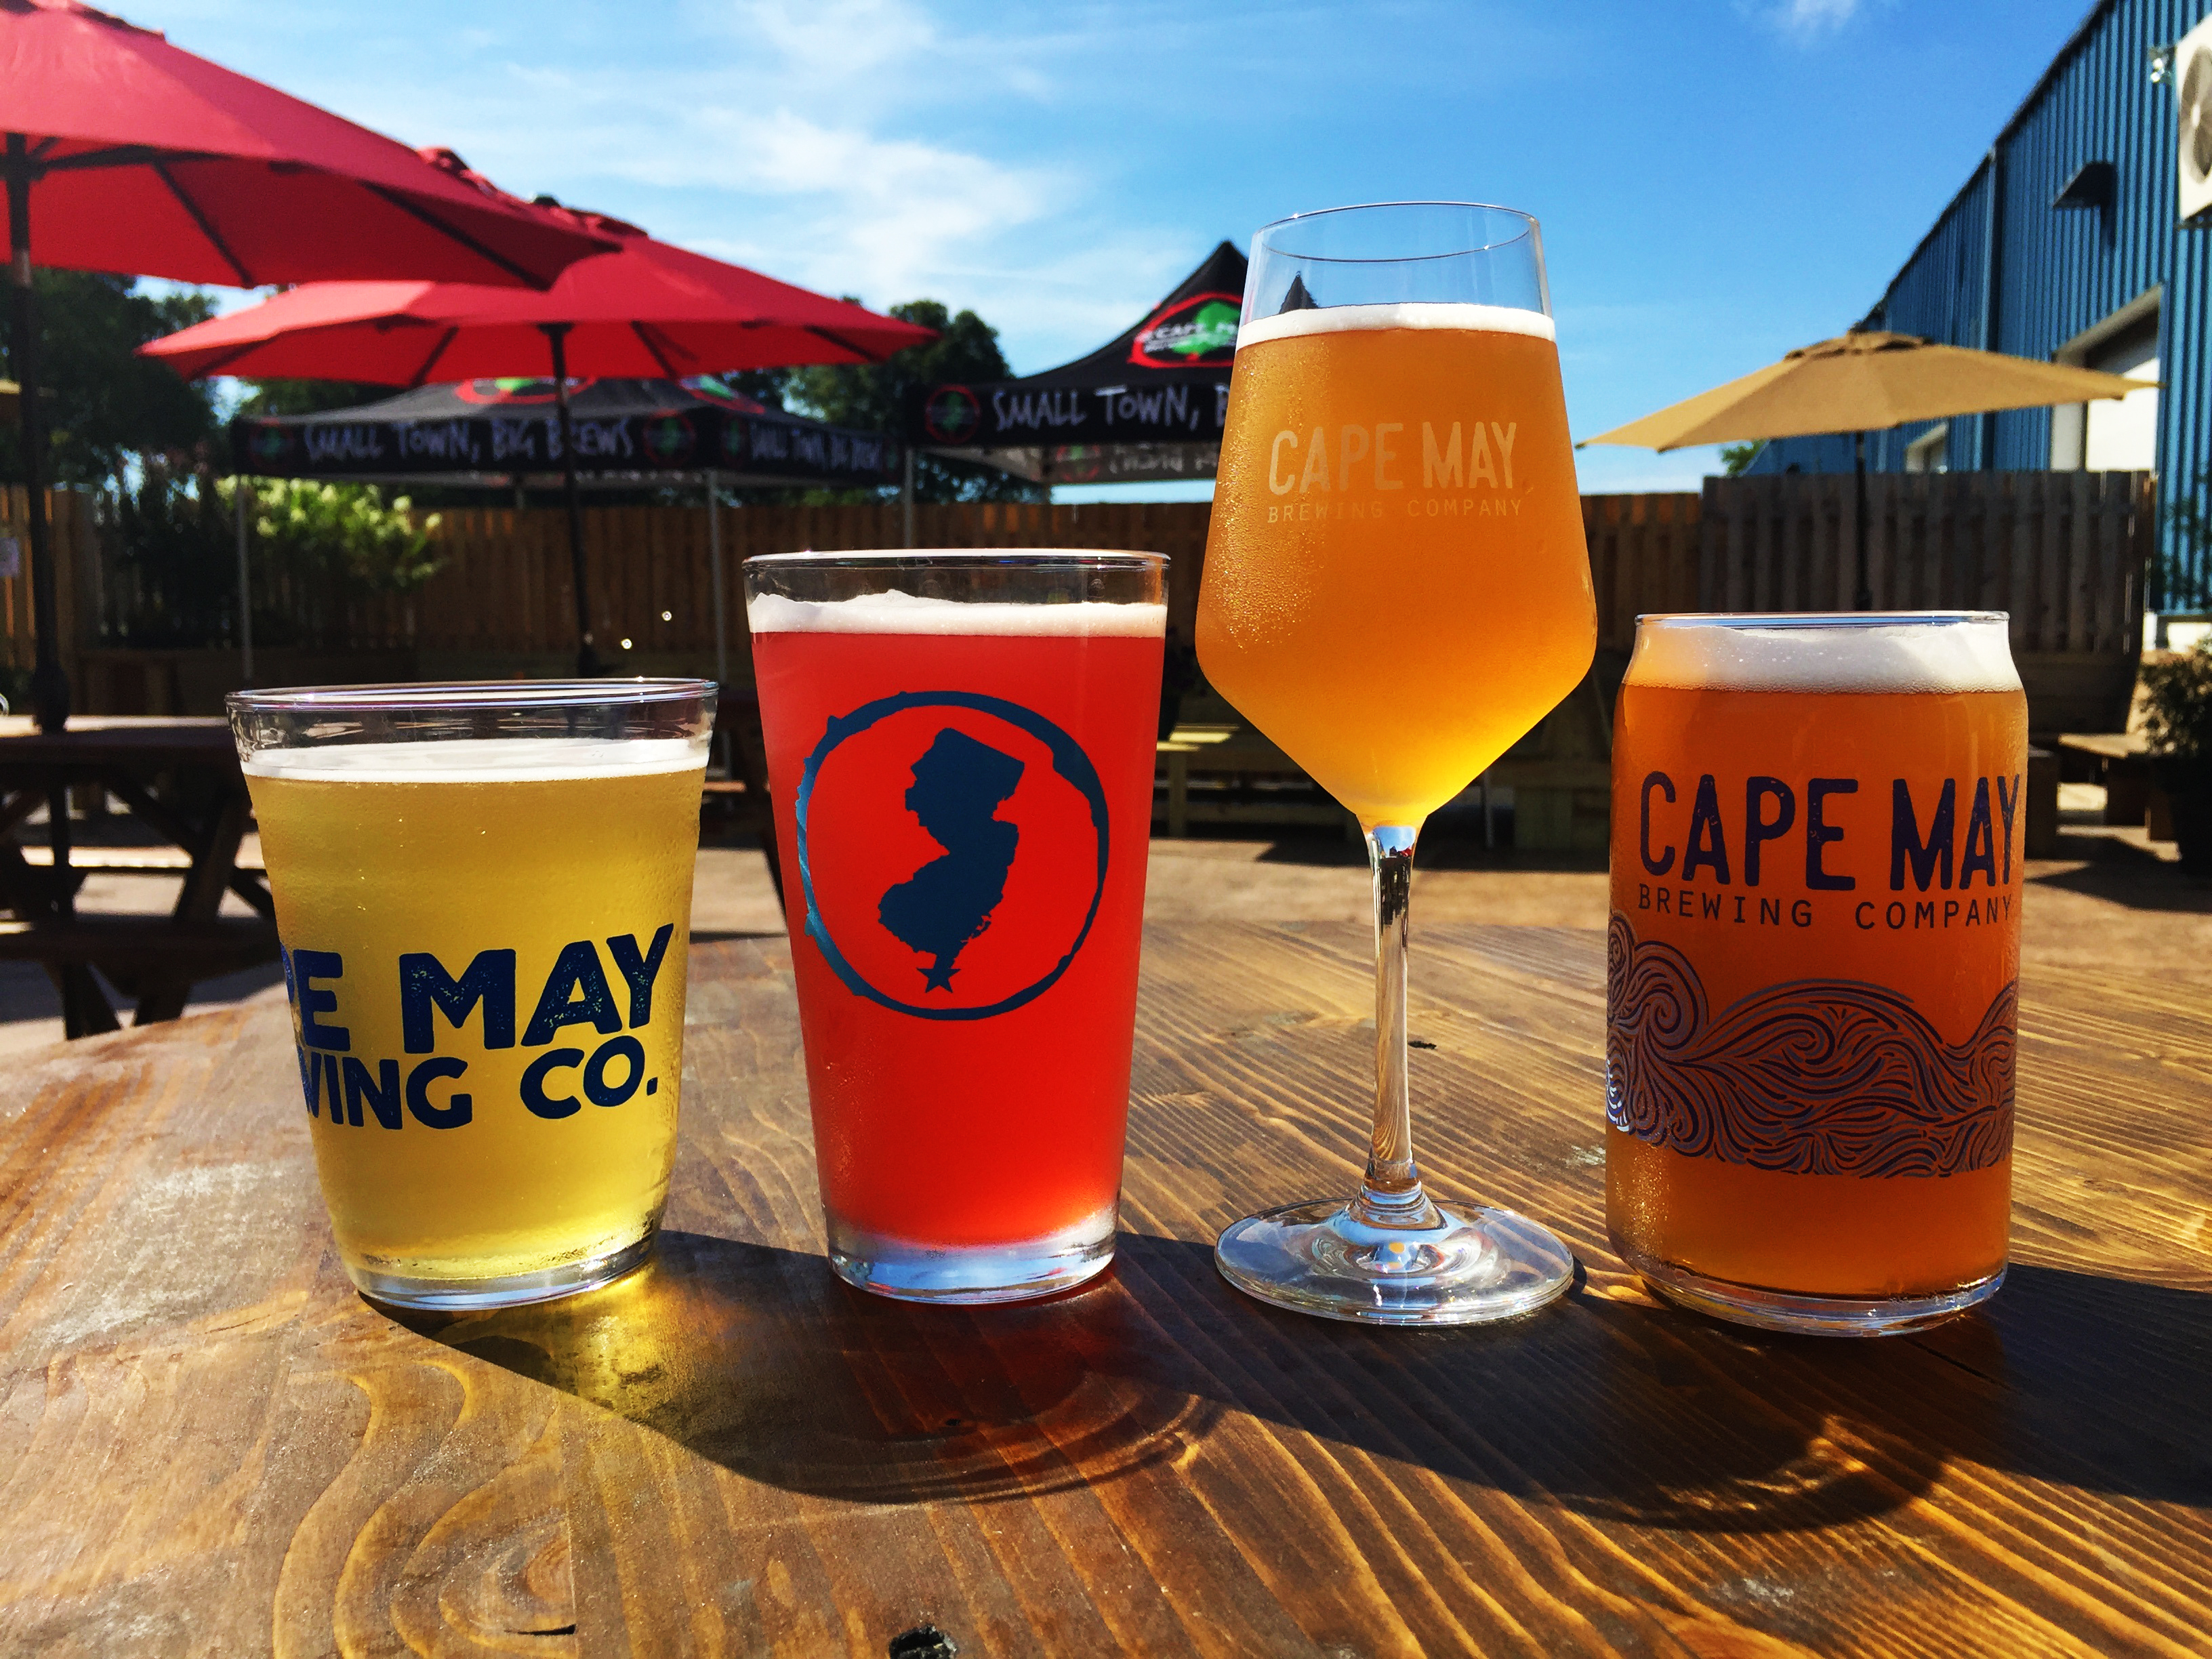 cape may brewery tour bus